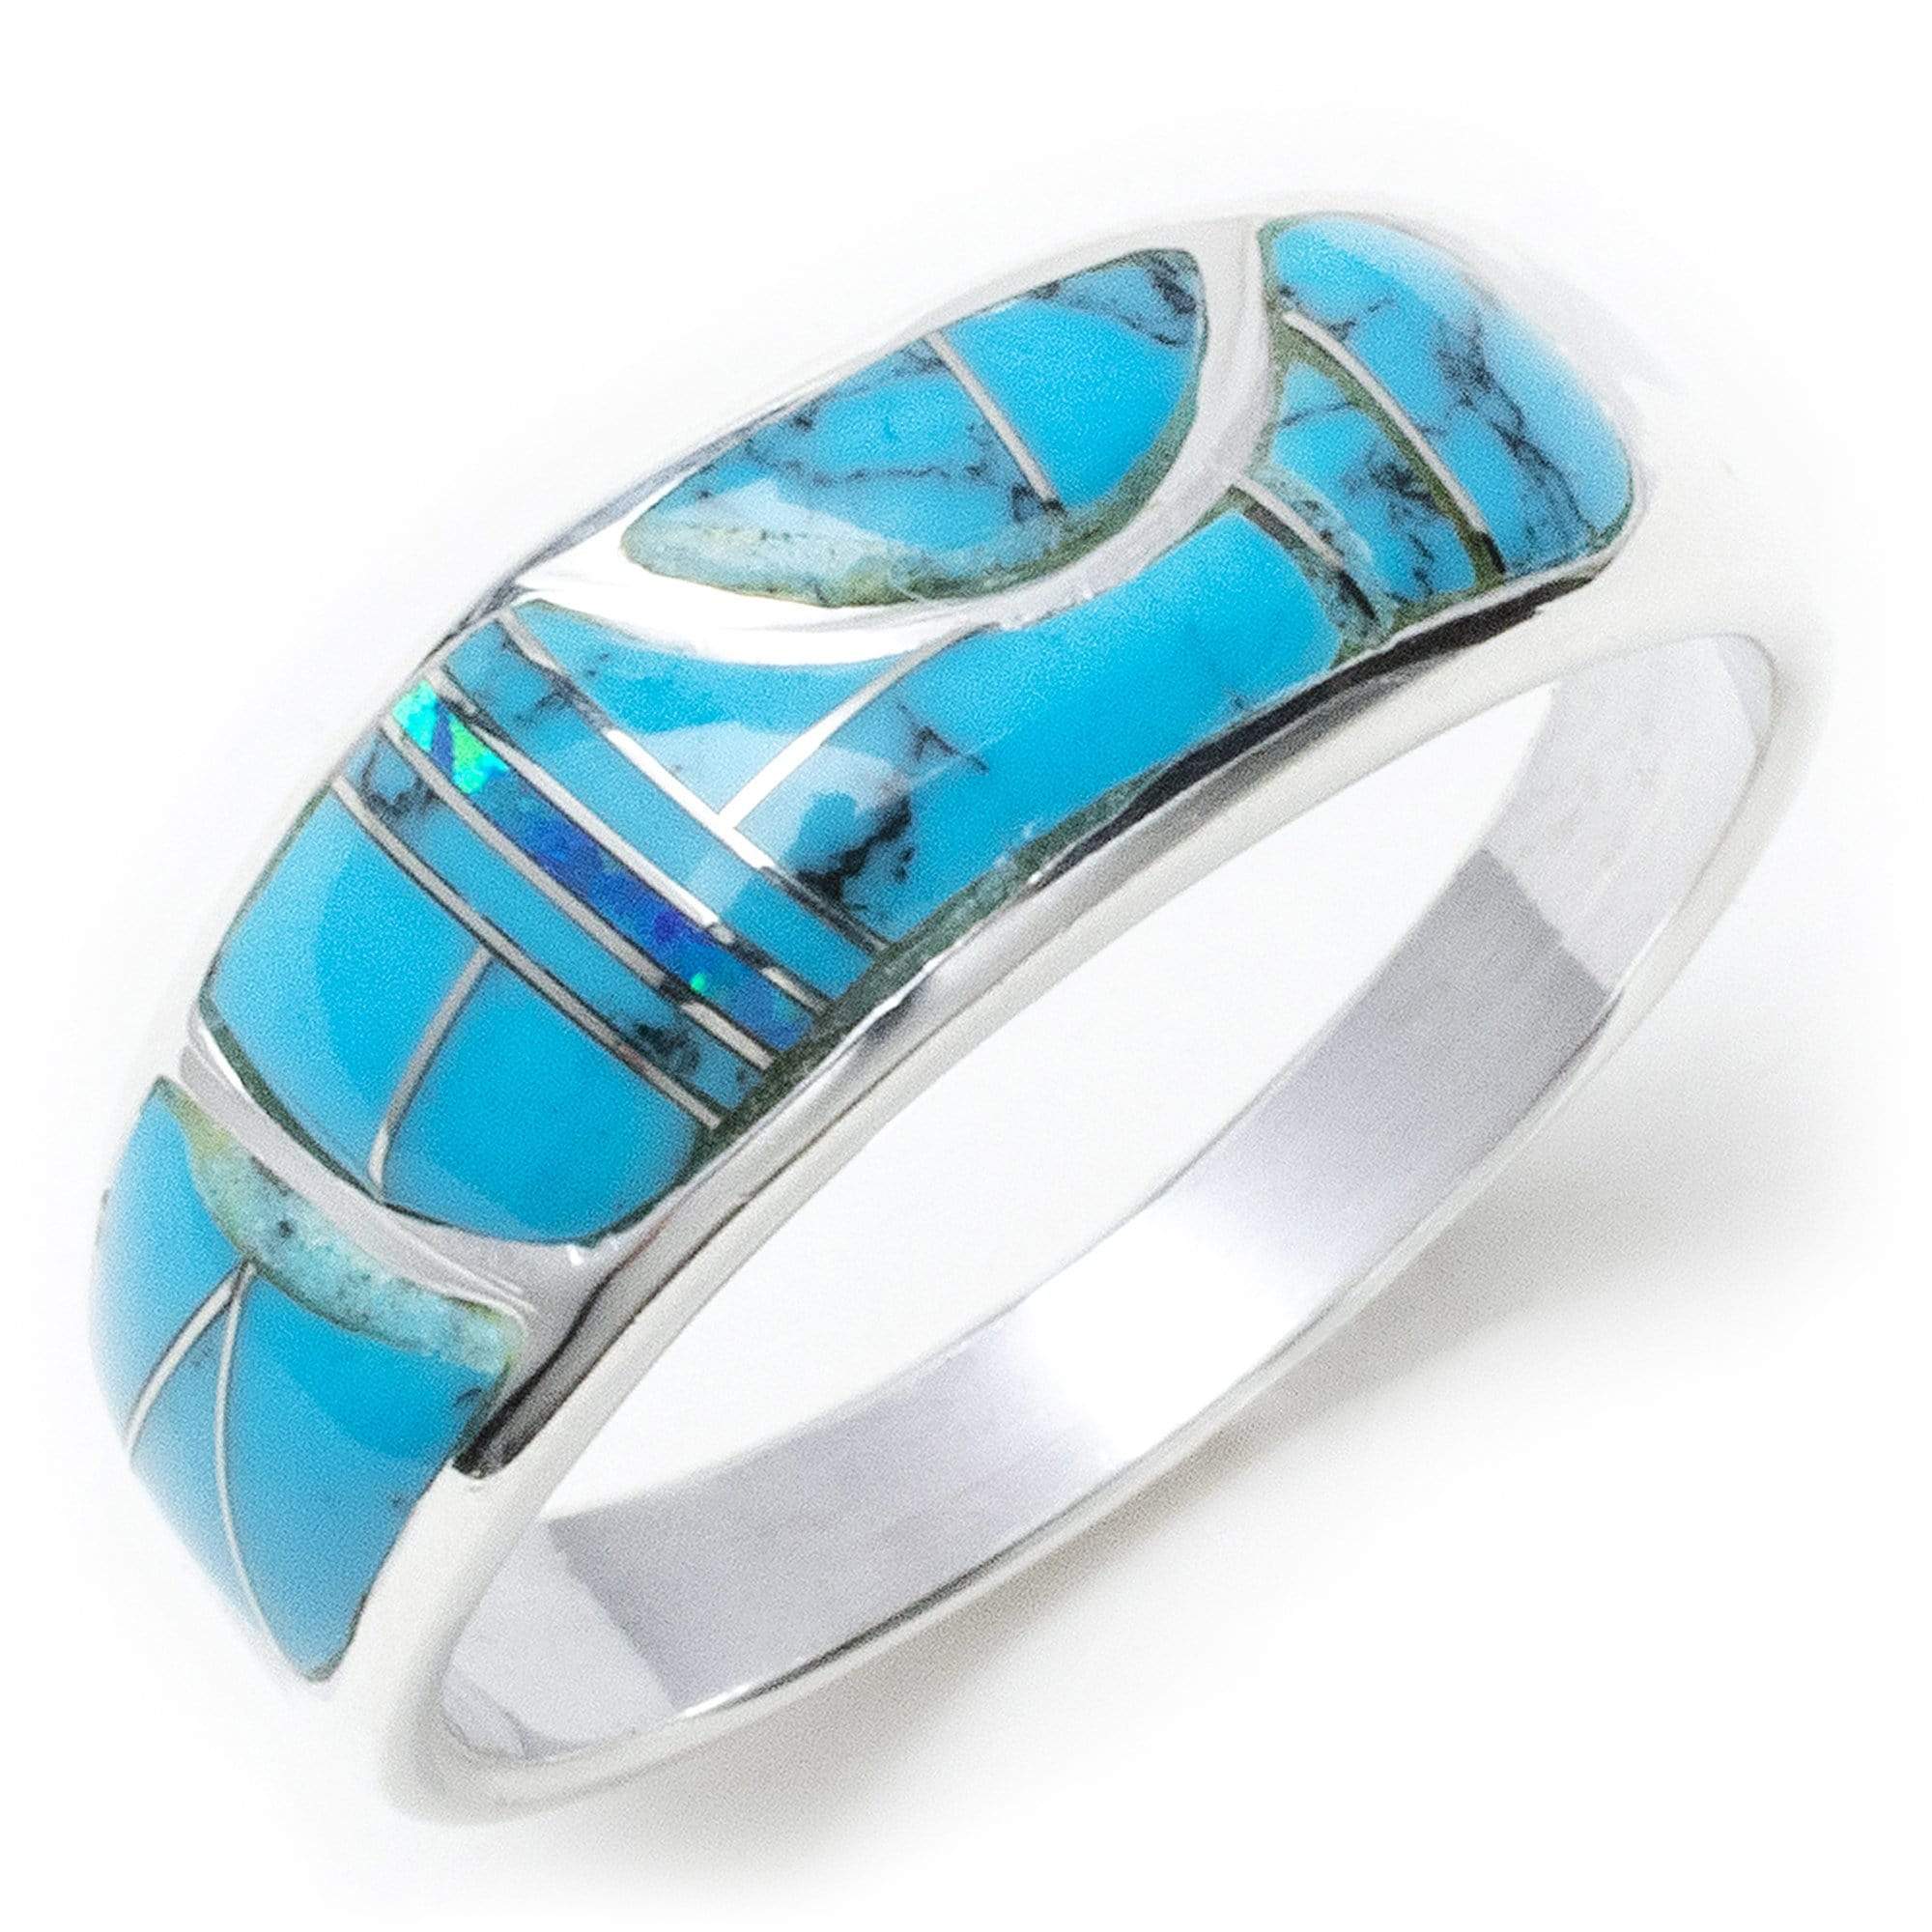 Kalifano Southwest Silver Jewelry Turquoise 925 Sterling Silver Ring USA Handmade with Labratory Opal Accent